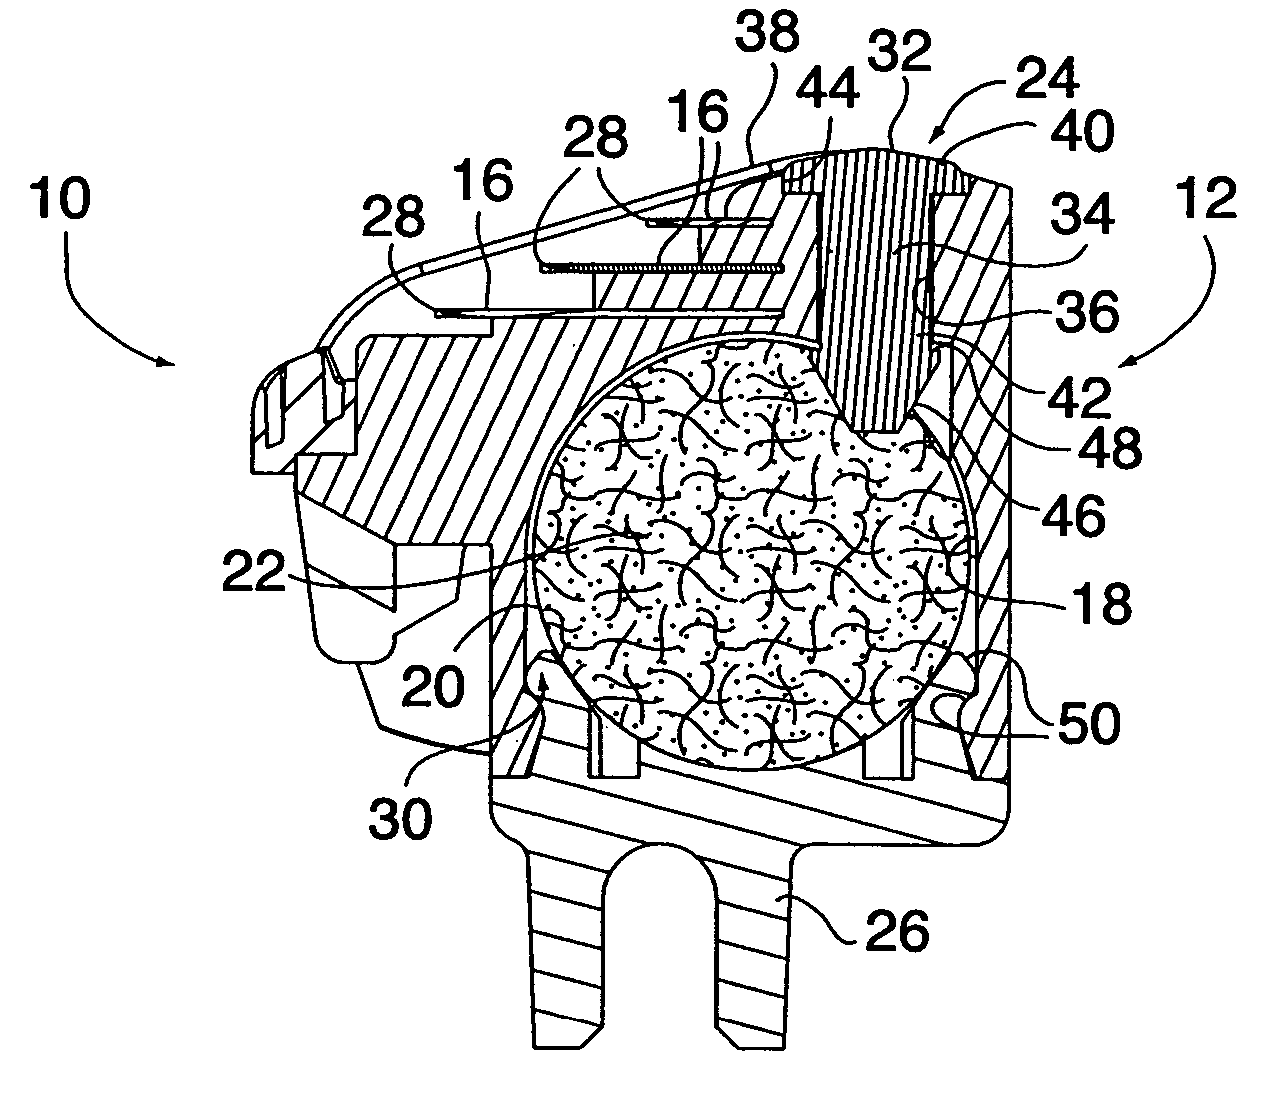 Shaving device with shaving aid material dispenser